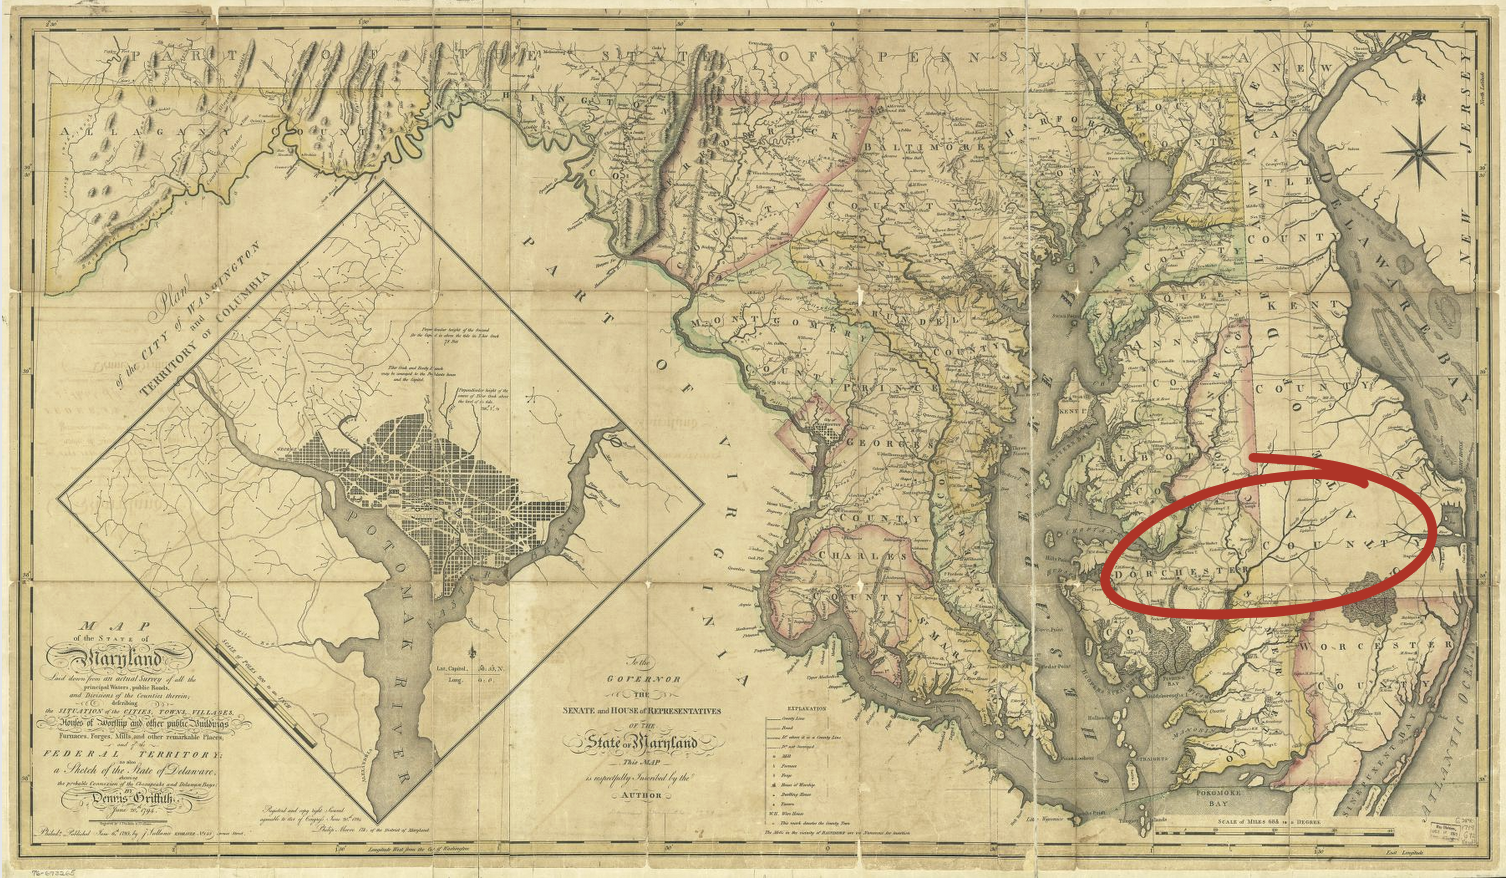 Map of Maryland with Dorchester circled in red